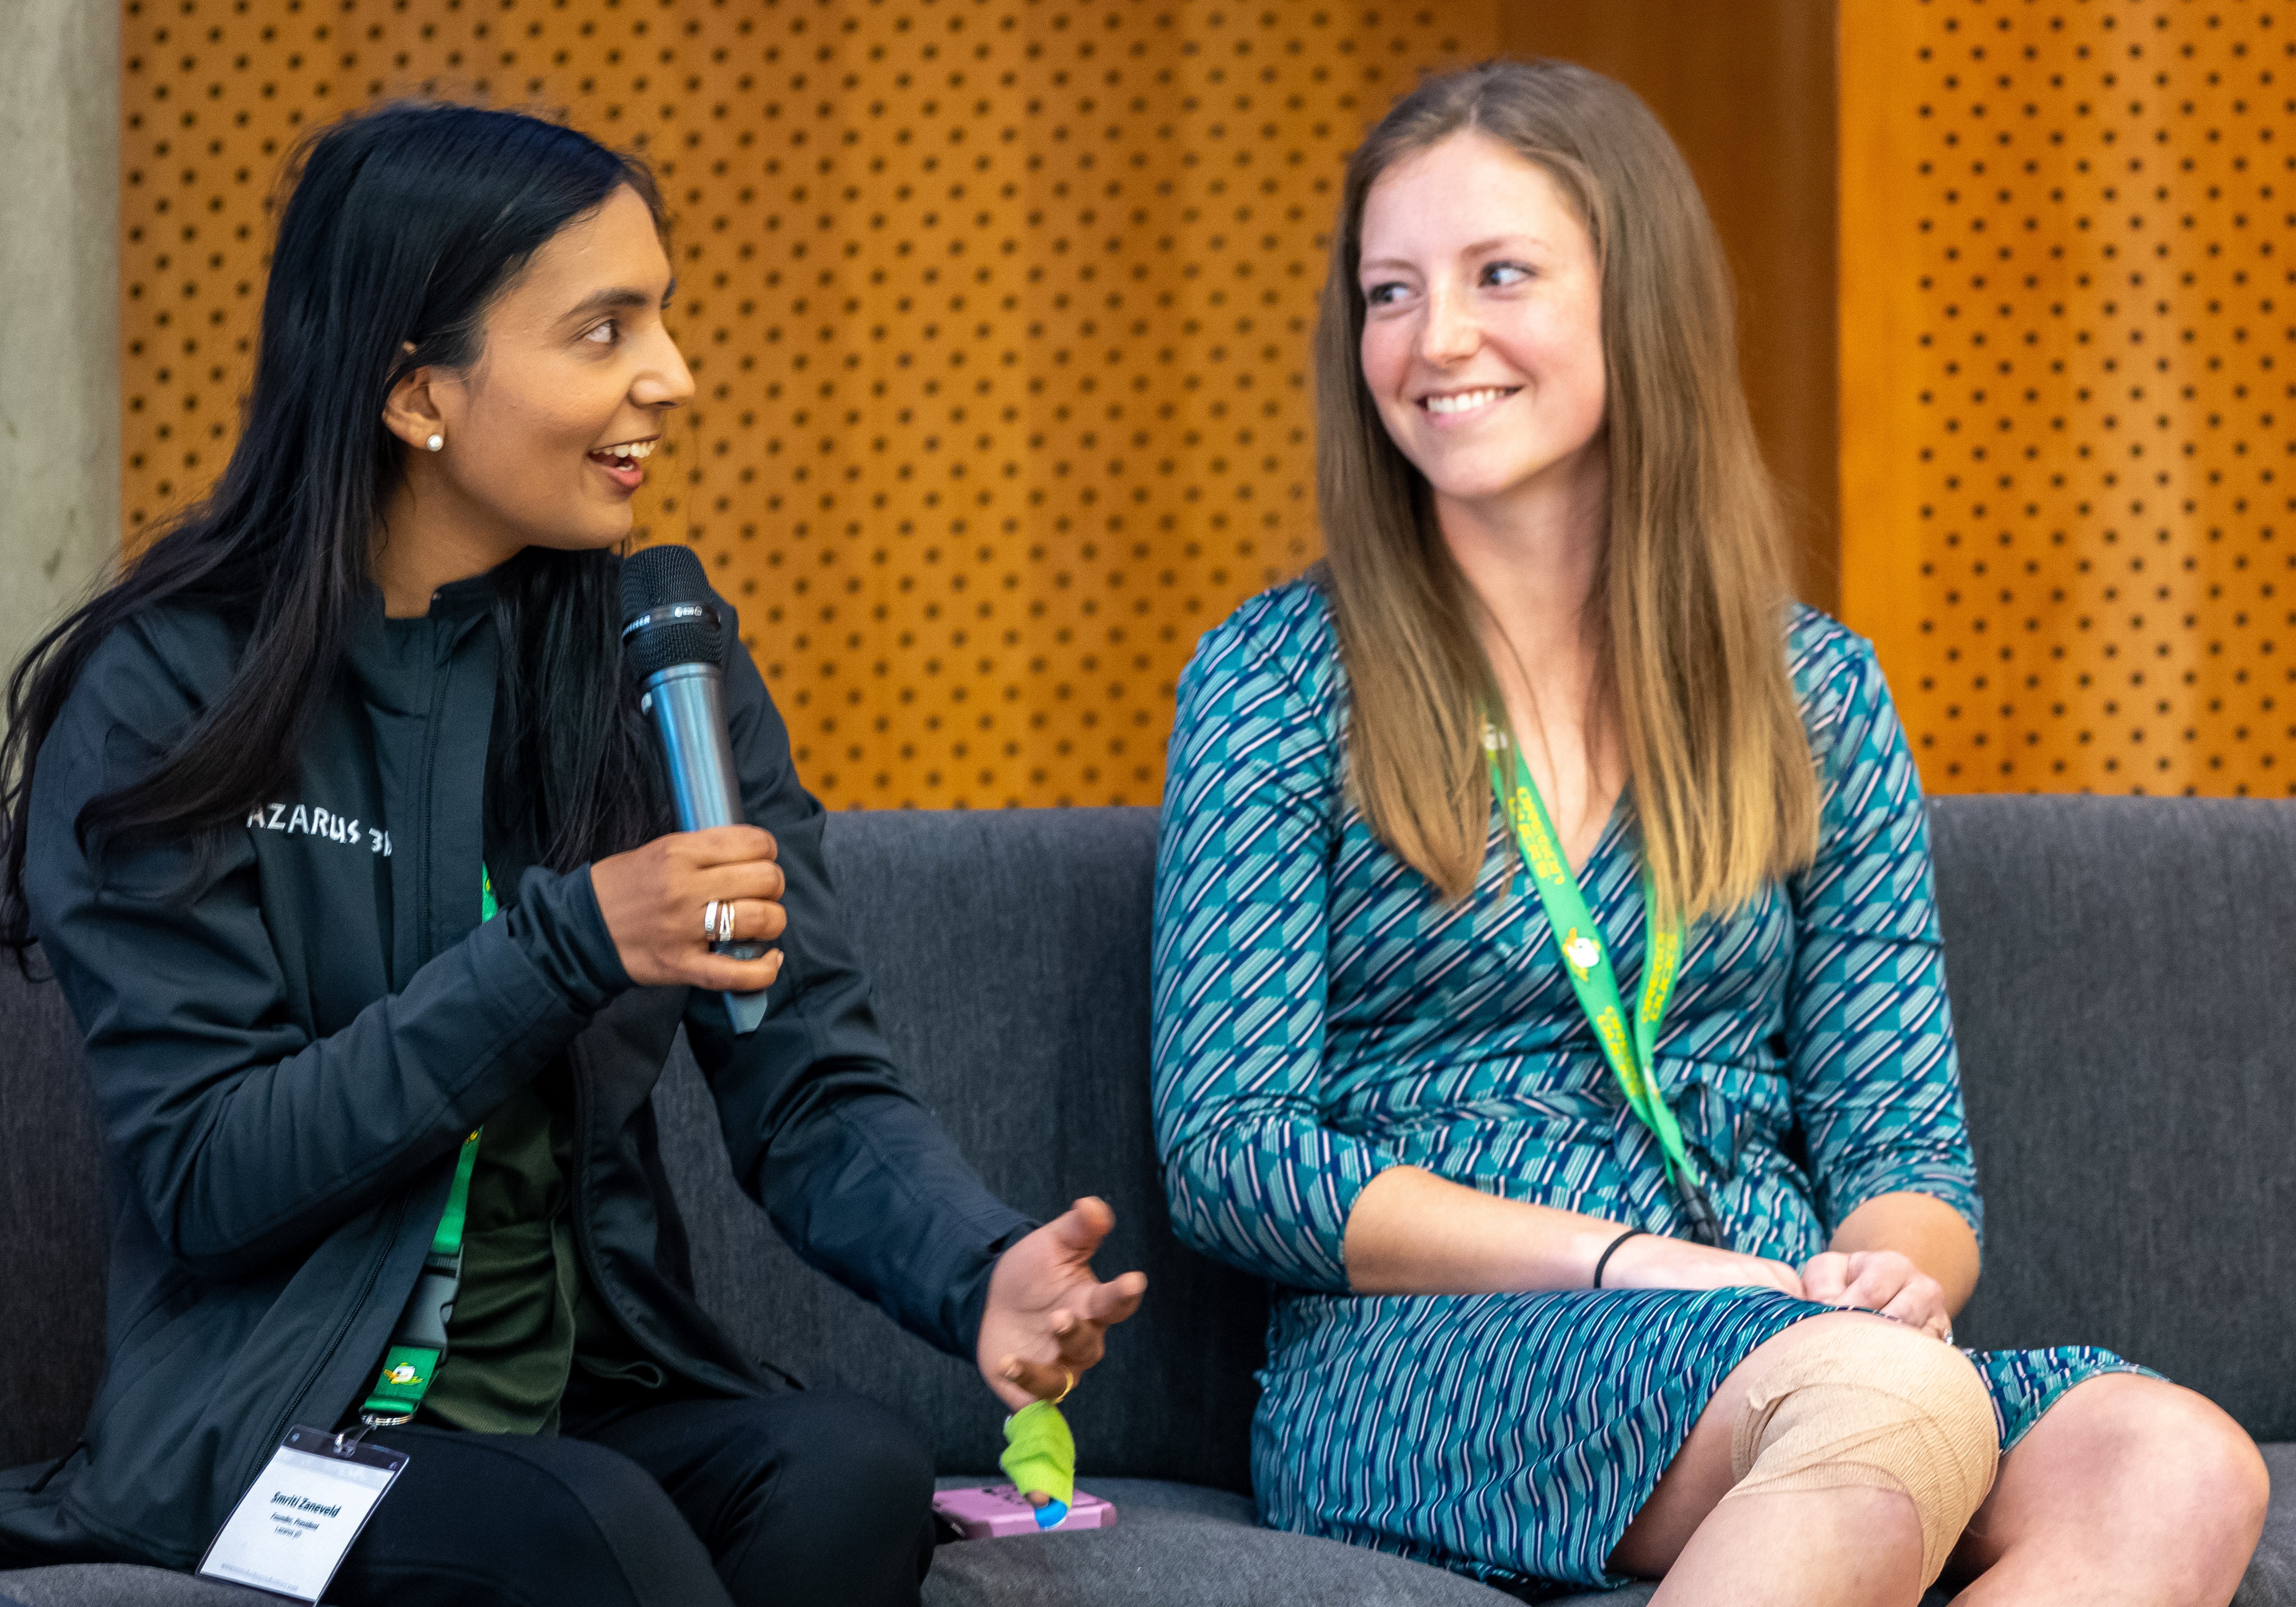 Photo of WIN mentor Smriti Zaneveld holding a microphone and talking with WIN participant Kylie Nash